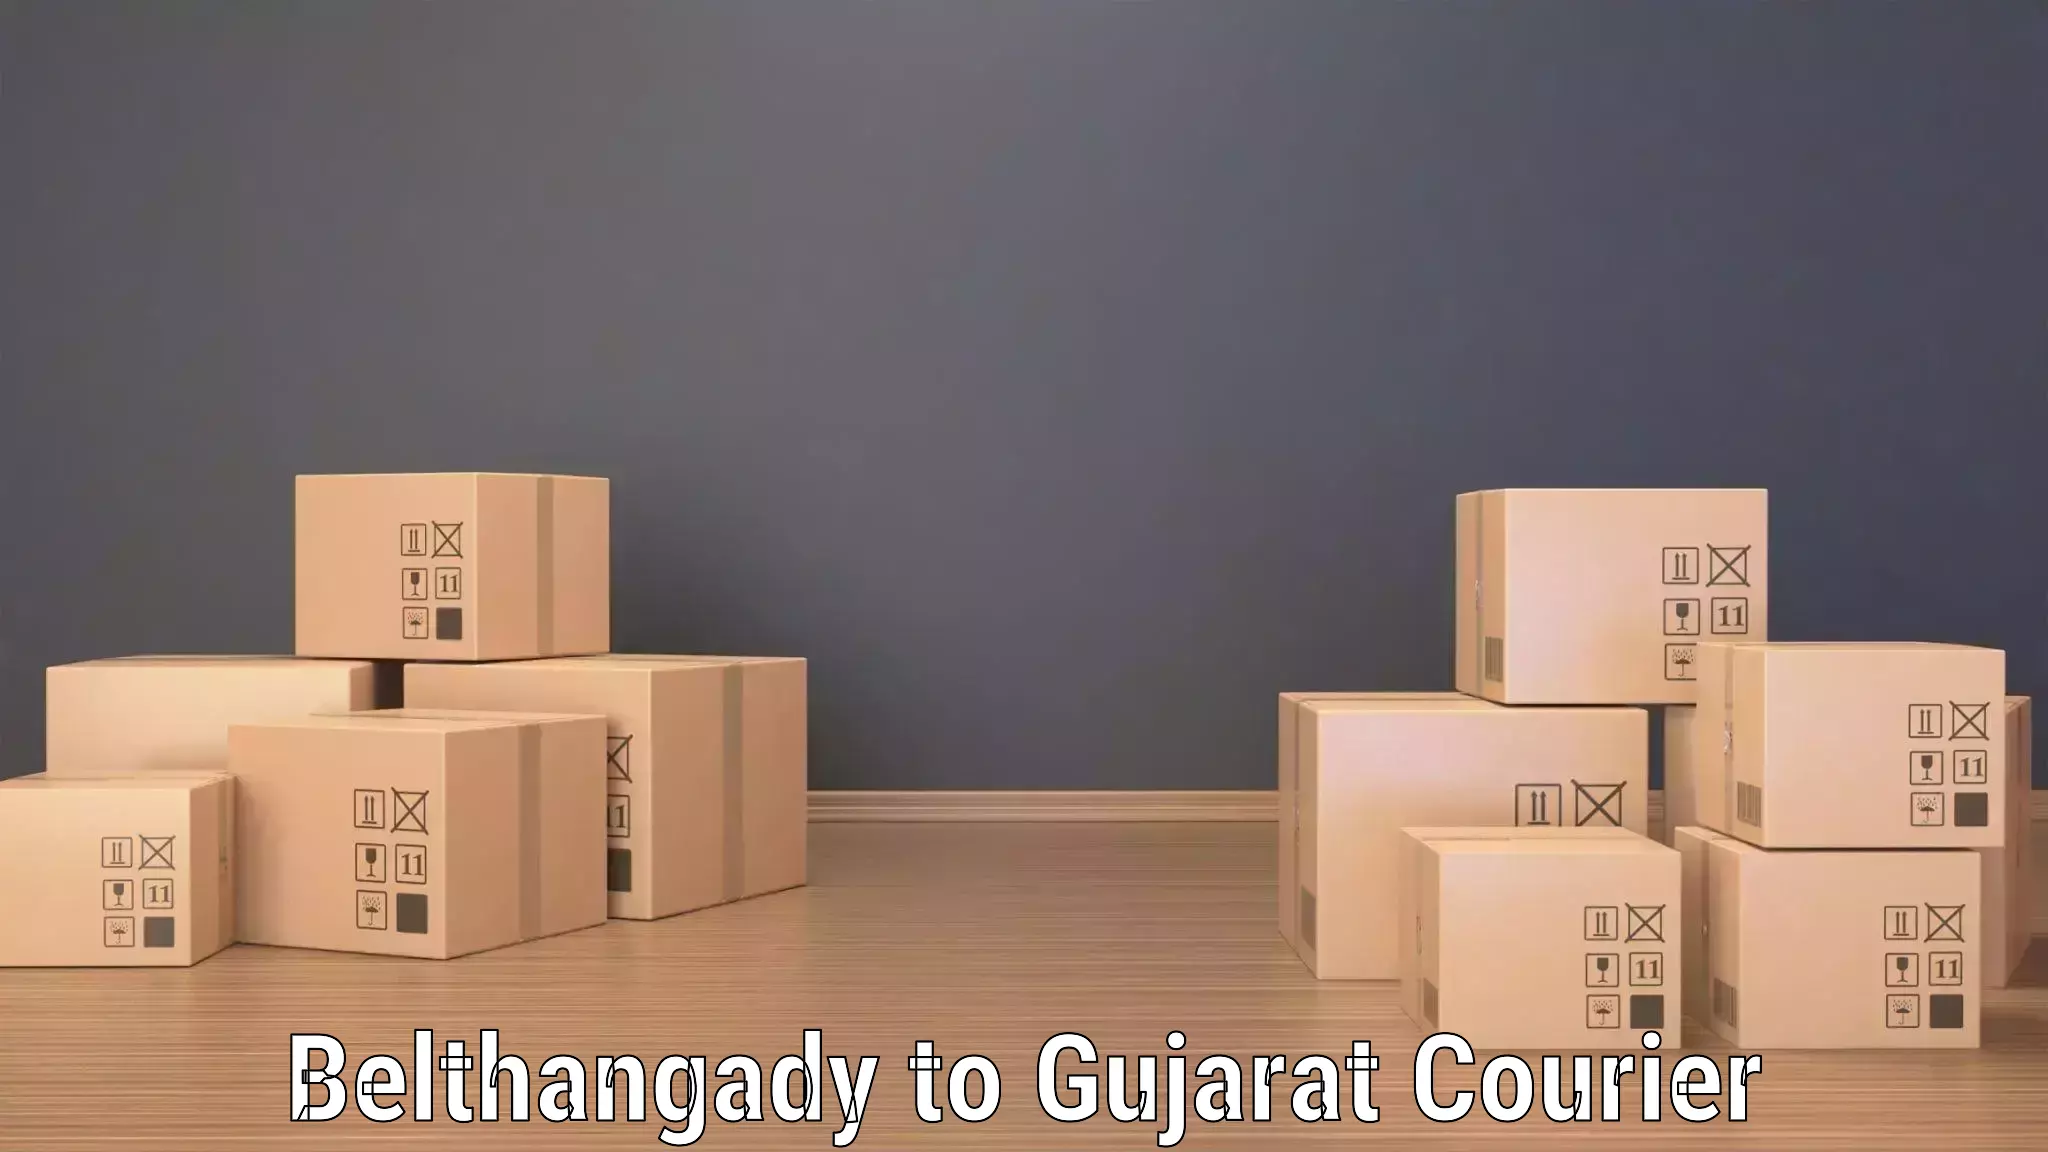 Express delivery network Belthangady to Ahmedabad